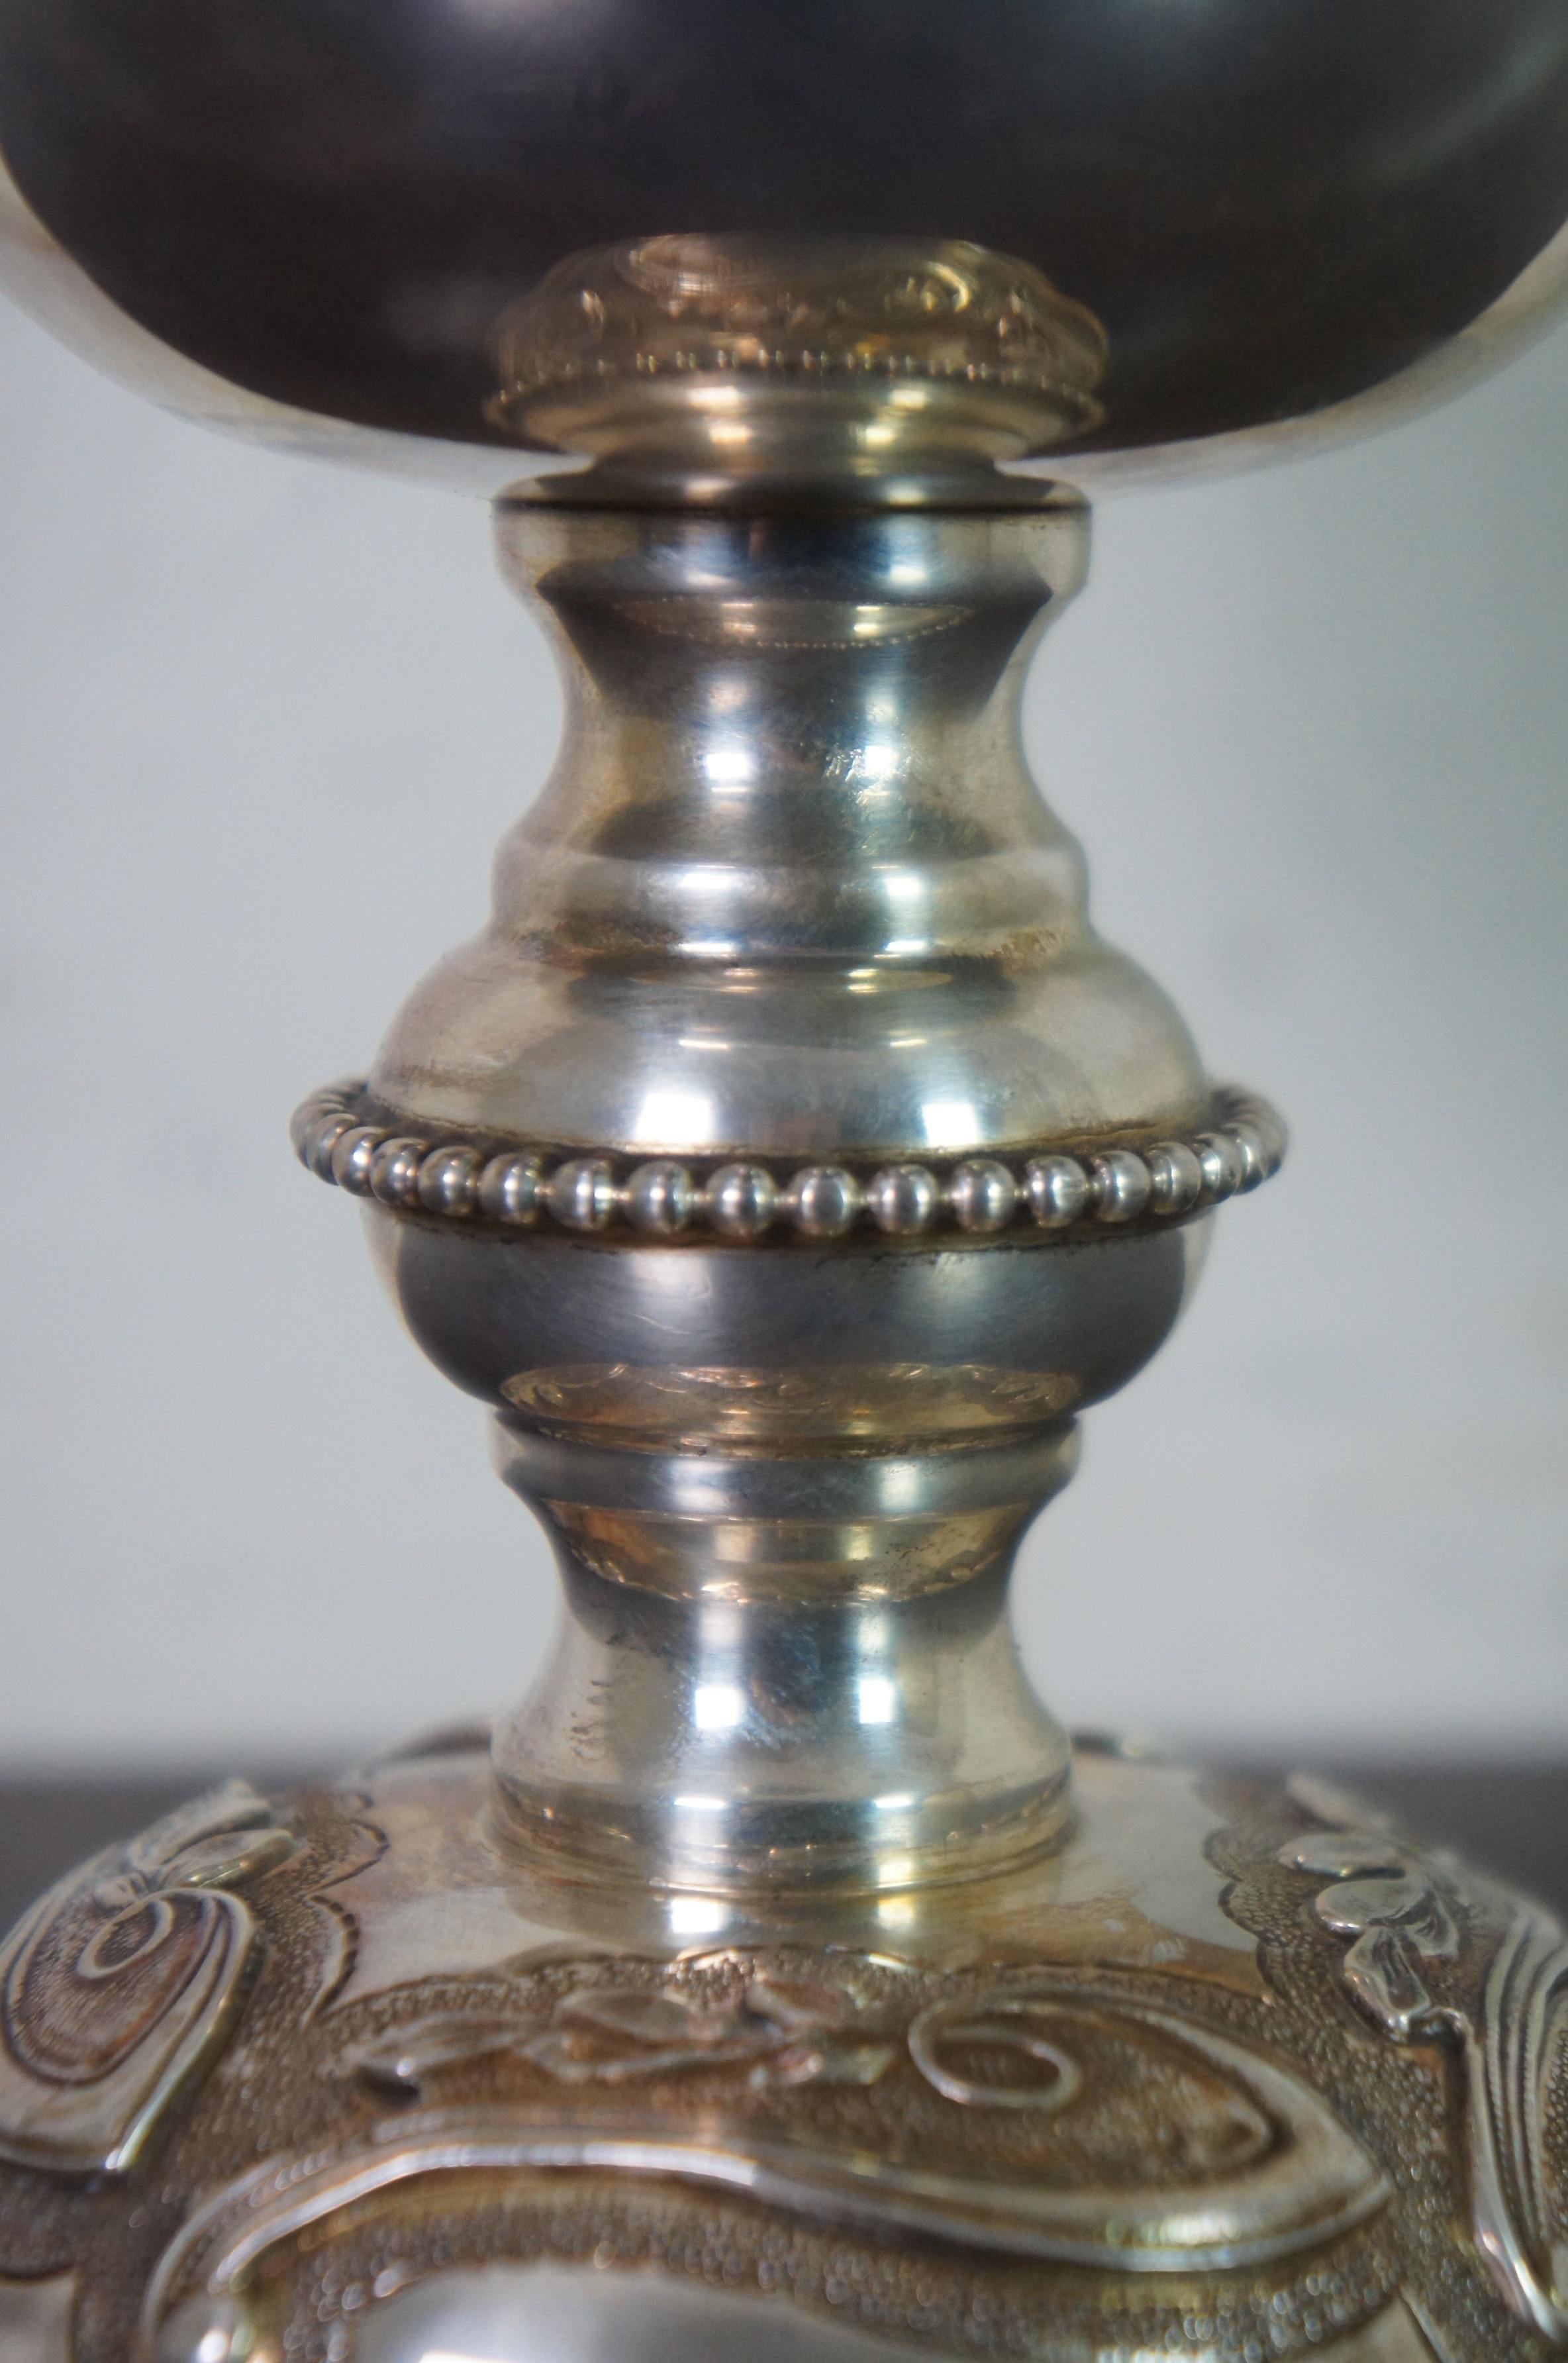 Antique Repousse Sterling Silver Kiddush Passover Wine Cup Goblet Judaica 350g 6